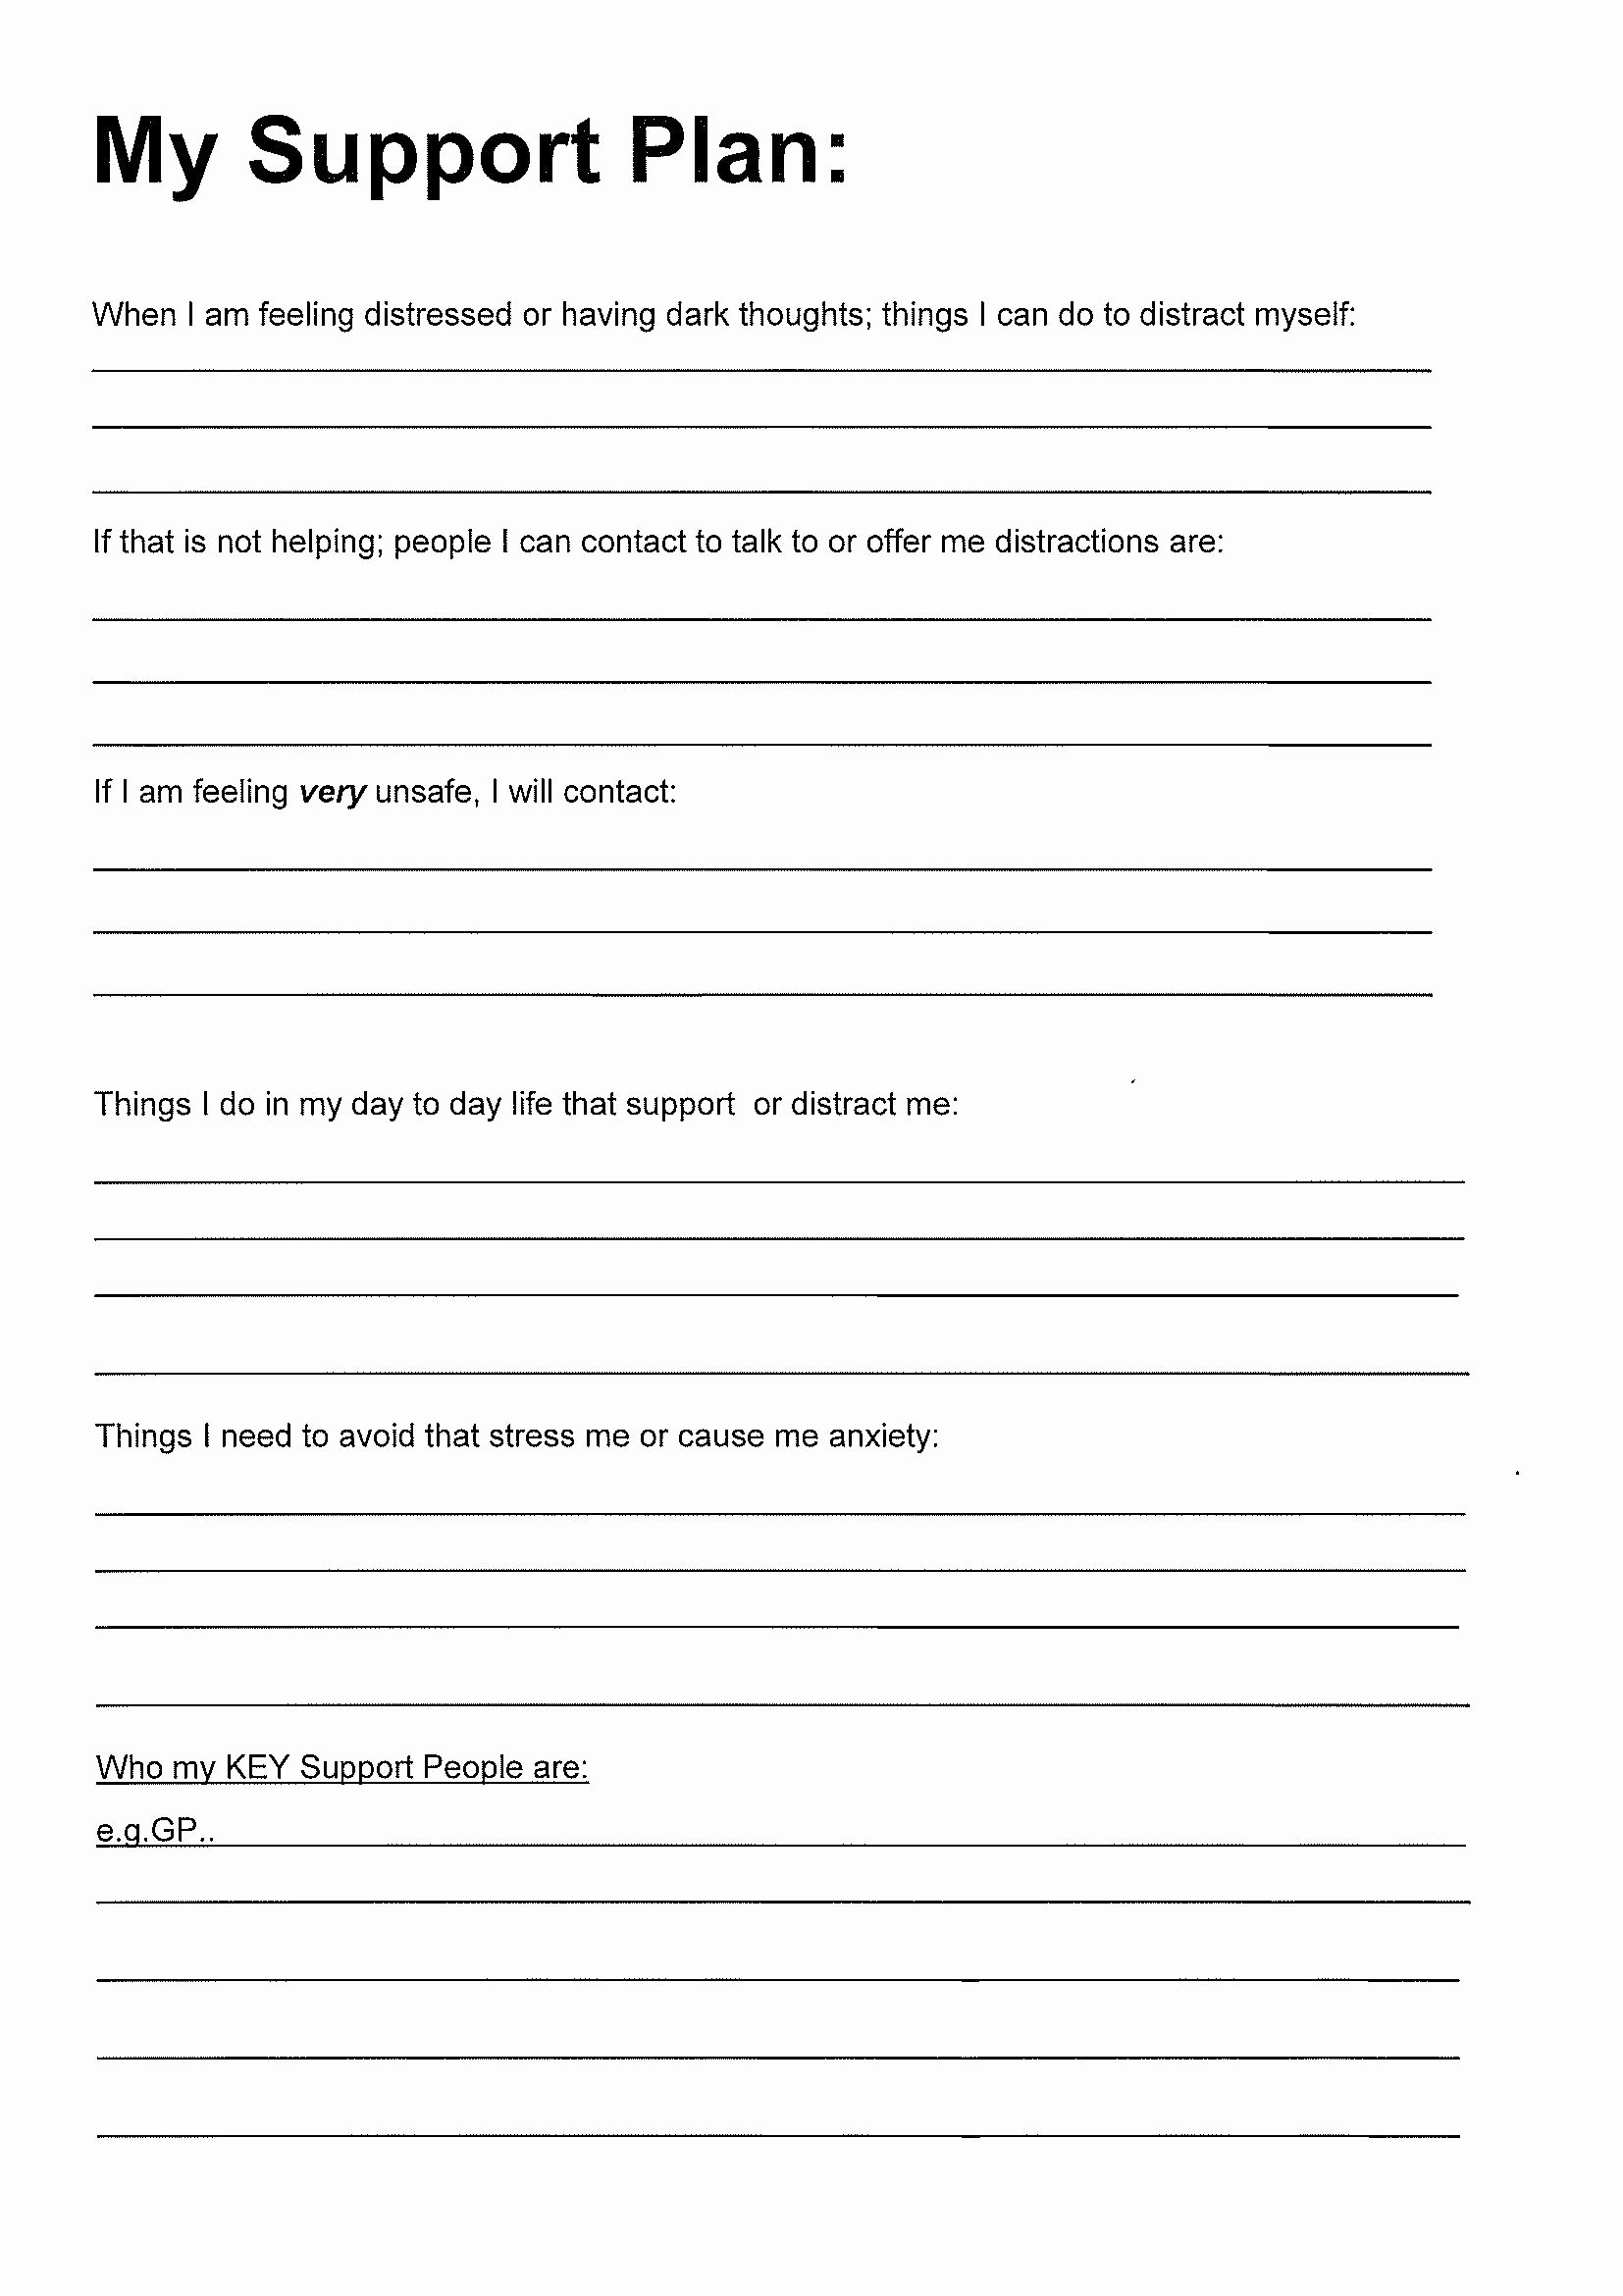 Safety Plan Template for Students Elegant Mental Health Safety Plan Template